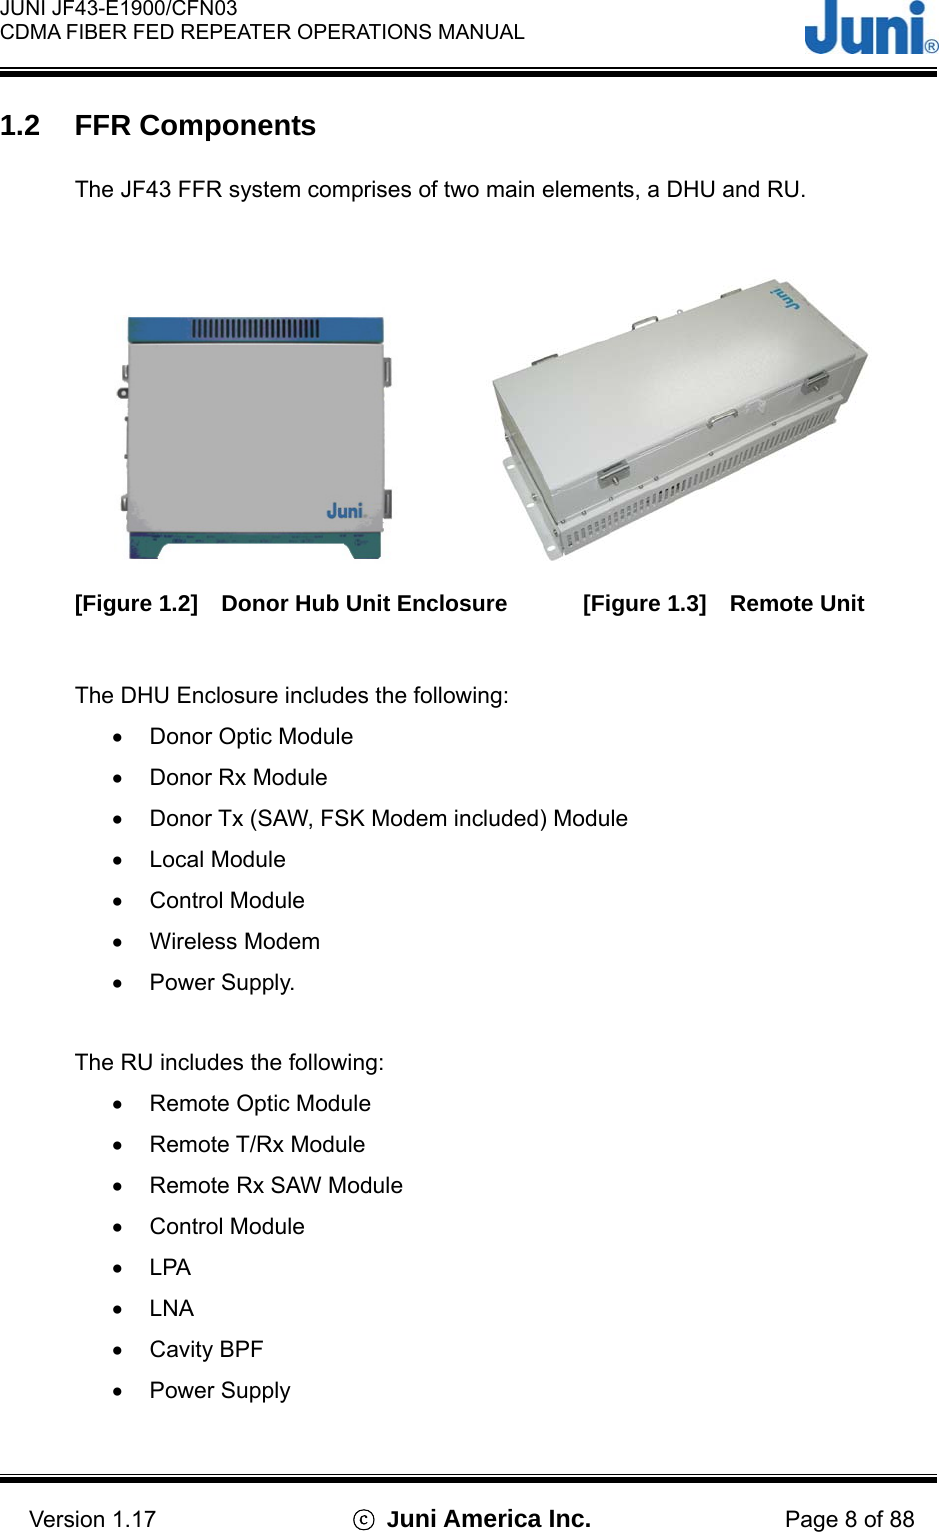  JUNI JF43-E1900/CFN03 CDMA FIBER FED REPEATER OPERATIONS MANUAL                                    Version 1.17  ⓒ Juni America Inc. Page 8 of 88 1.2 FFR Components  The JF43 FFR system comprises of two main elements, a DHU and RU.                         [Figure 1.2]  Donor Hub Unit Enclosure     [Figure 1.3]  Remote Unit   The DHU Enclosure includes the following: •  Donor Optic Module •  Donor Rx Module •  Donor Tx (SAW, FSK Modem included) Module •  Local Module •  Control Module •  Wireless Modem •  Power Supply.  The RU includes the following: •  Remote Optic Module •  Remote T/Rx Module •  Remote Rx SAW Module •  Control Module •  LPA •  LNA •  Cavity BPF •  Power Supply  